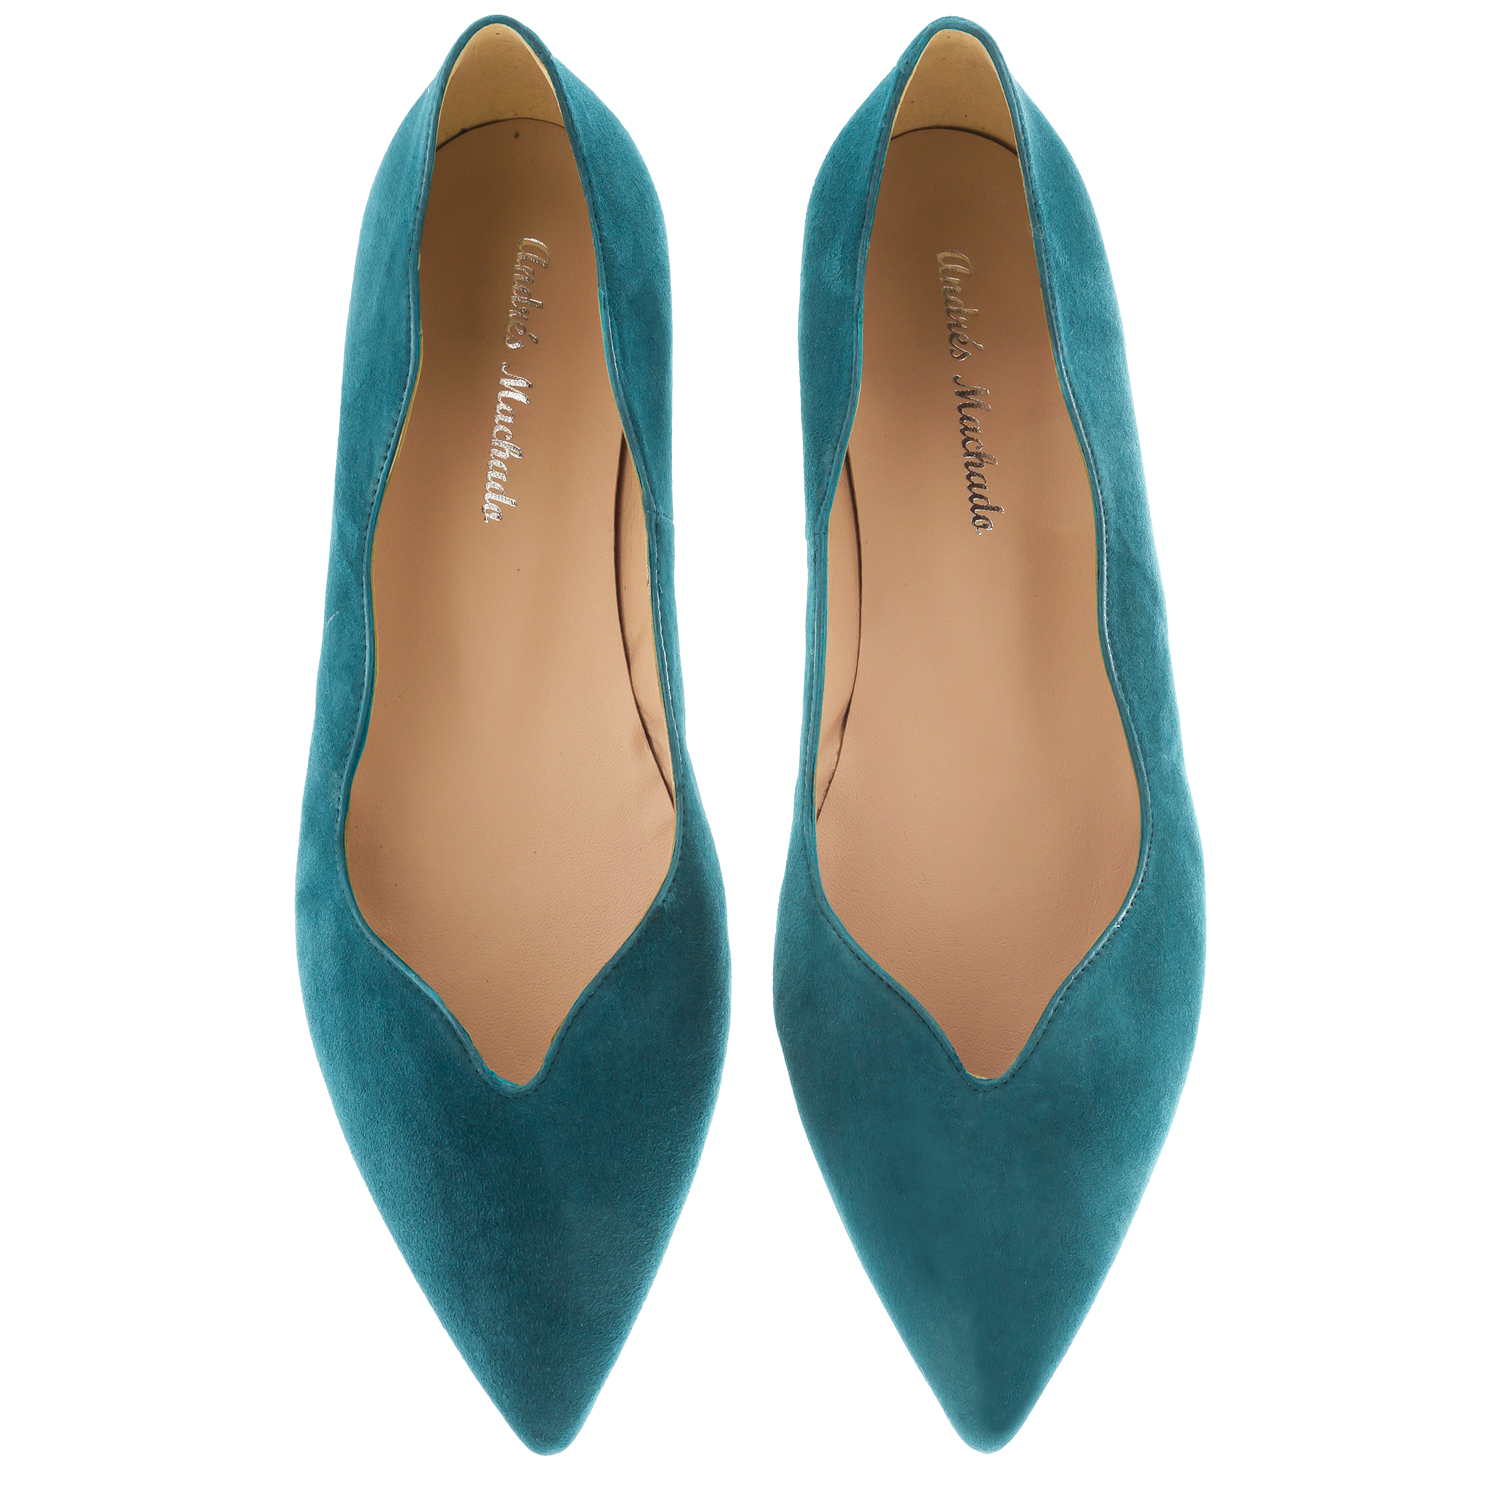 Waved Upper Ballet Flats in Blue Nappa Leather 